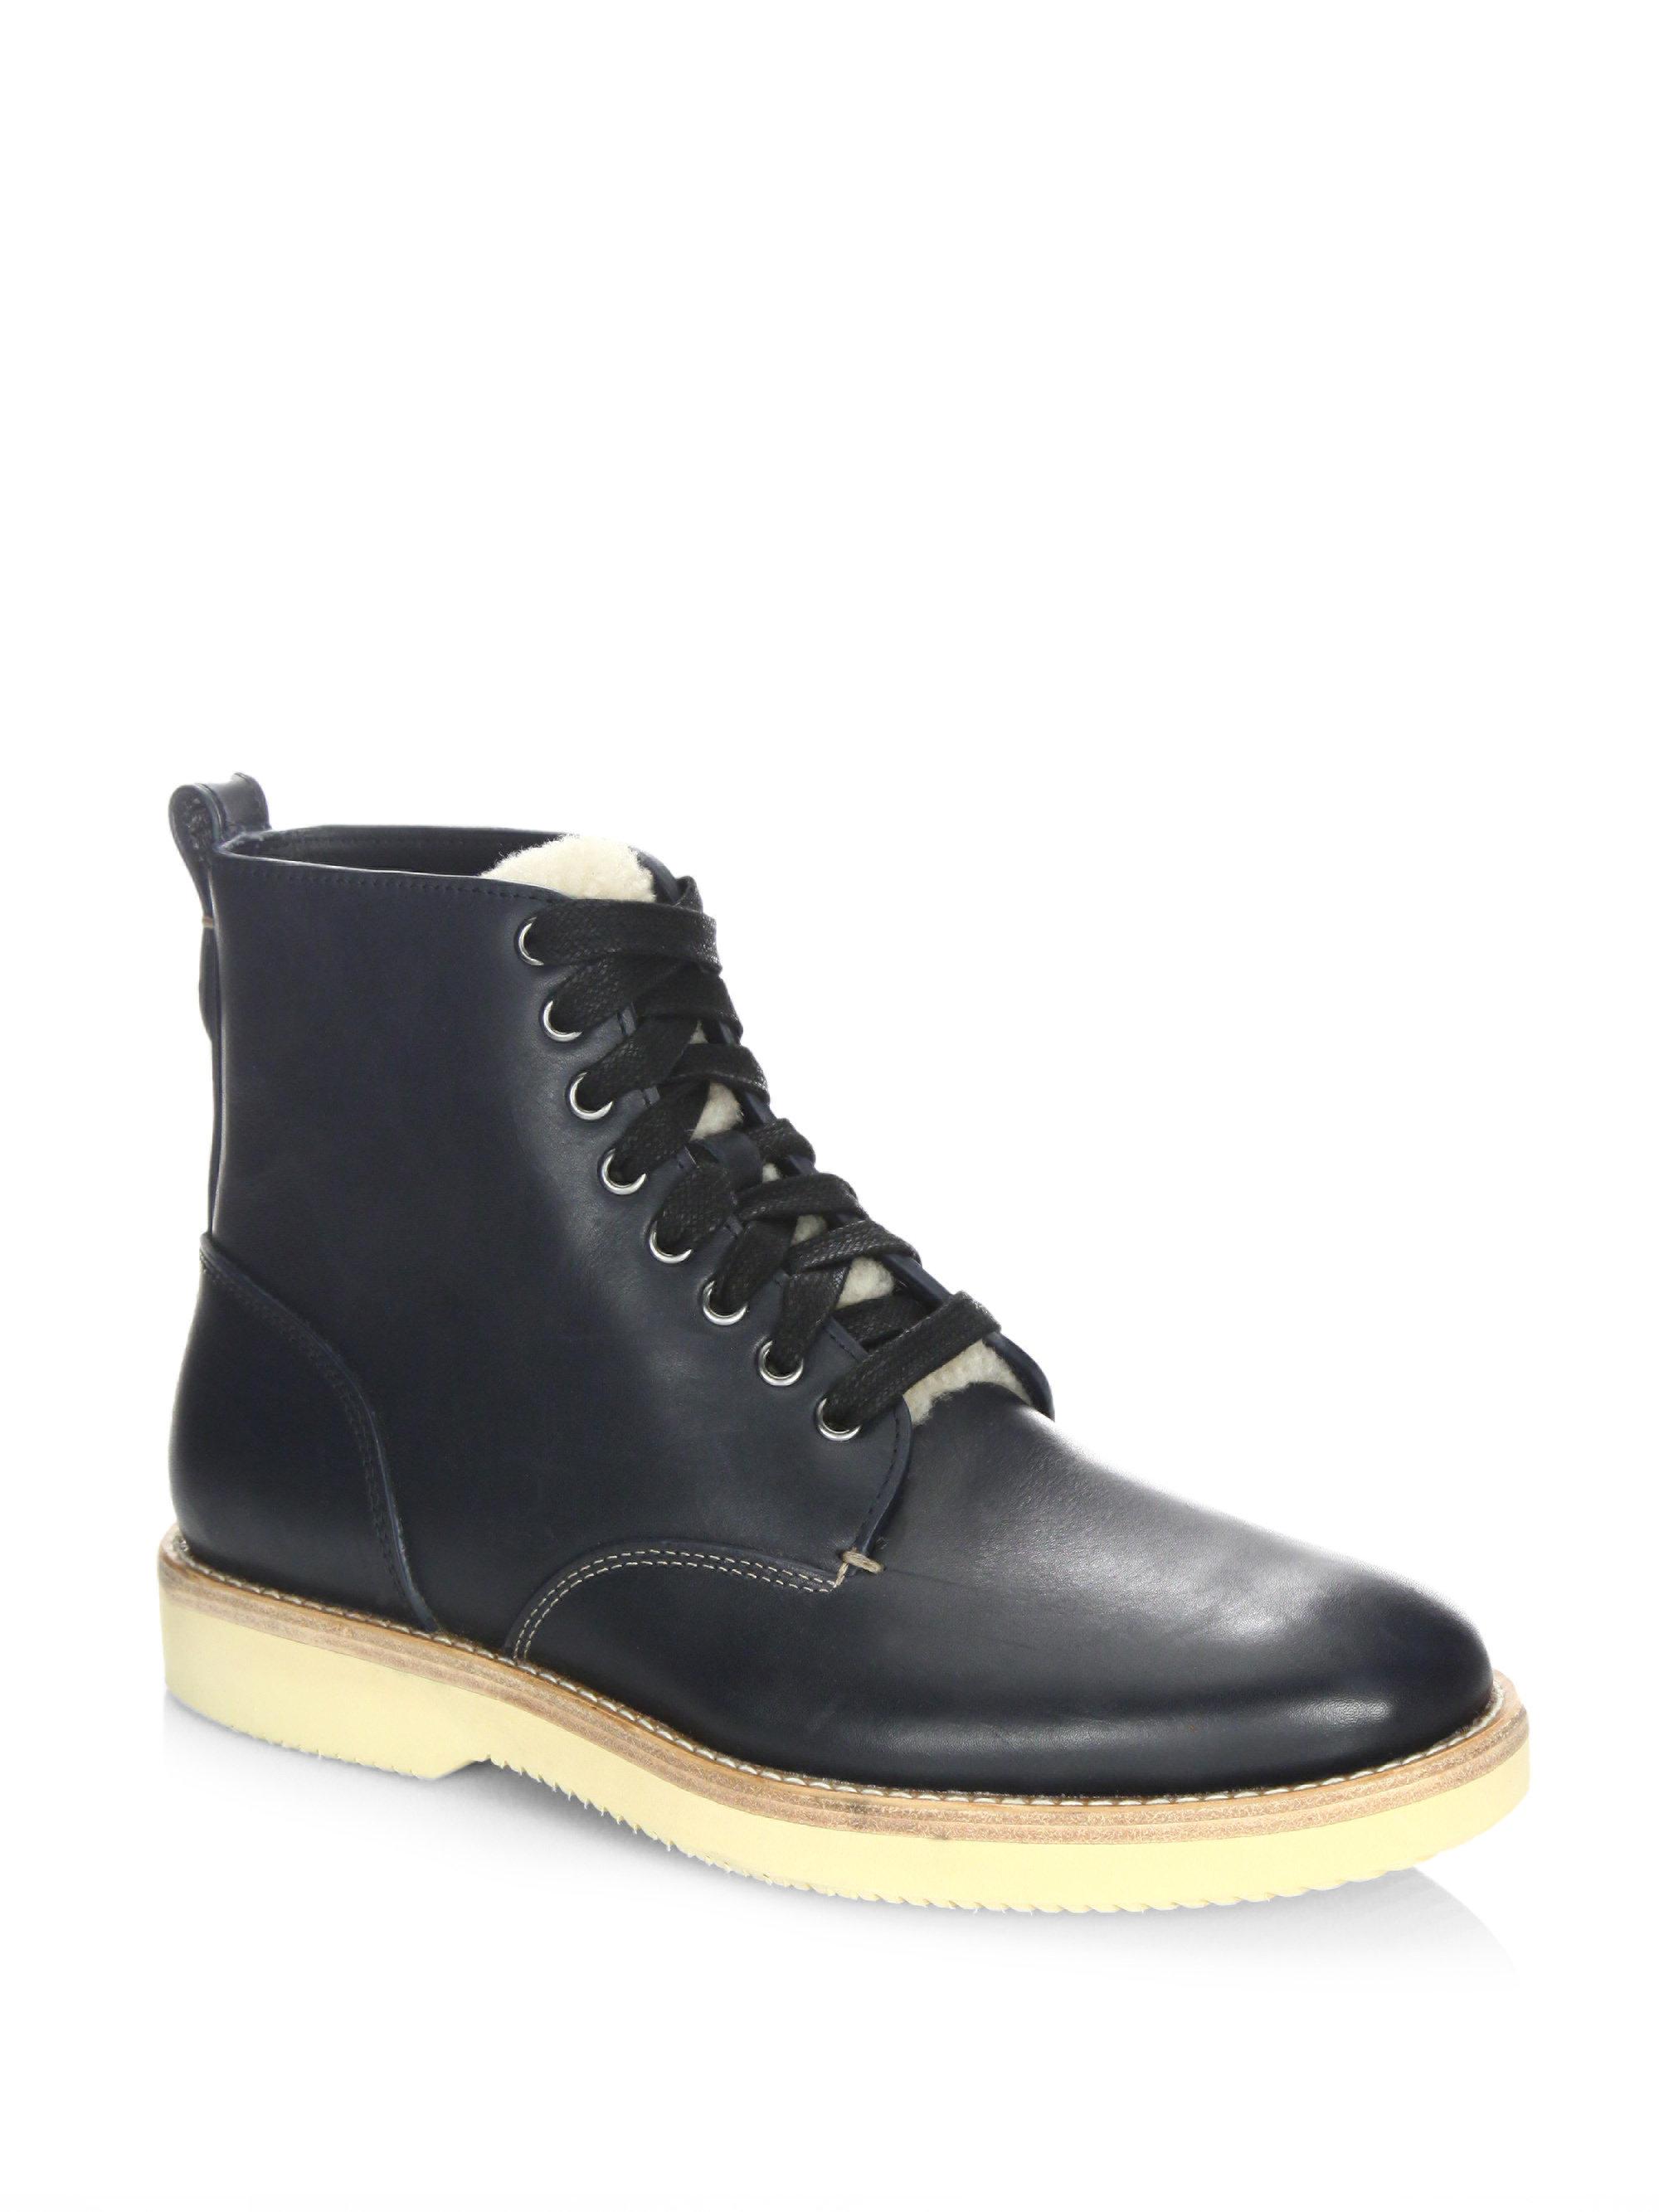 COACH Leather Shearling Derby Boots for Men - Lyst